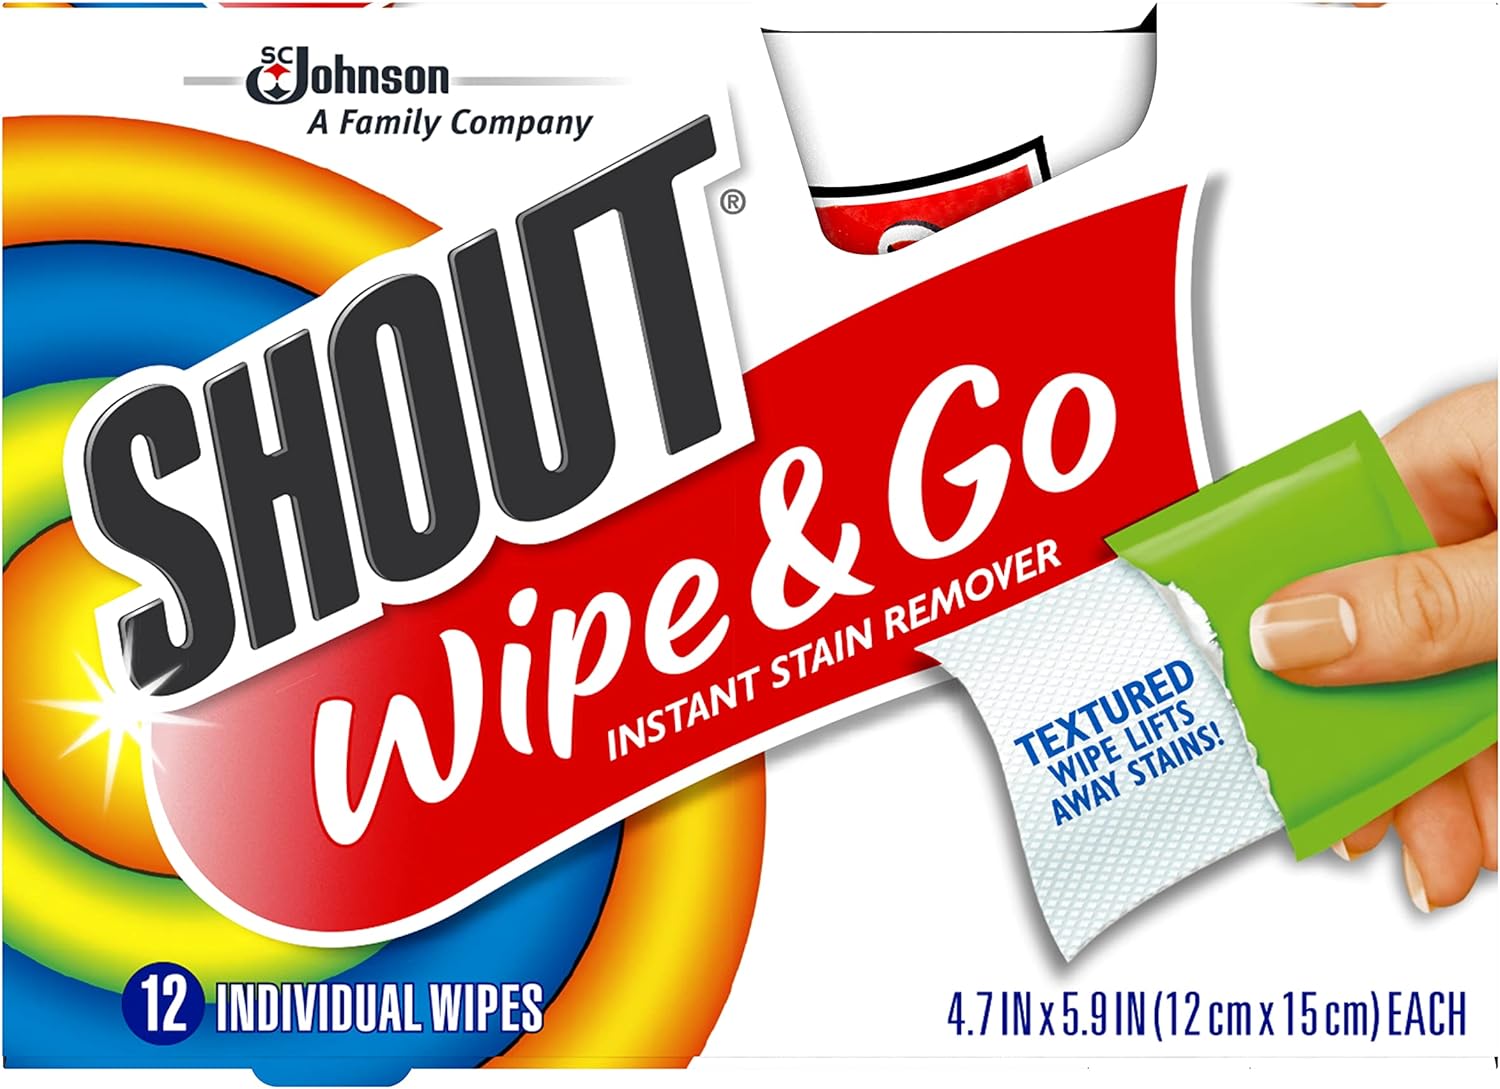 Shout Wipes, Wipe and Go Instant Stain Remover, Laundry Stain and Spot Remover for On-the-Go, 12 Count